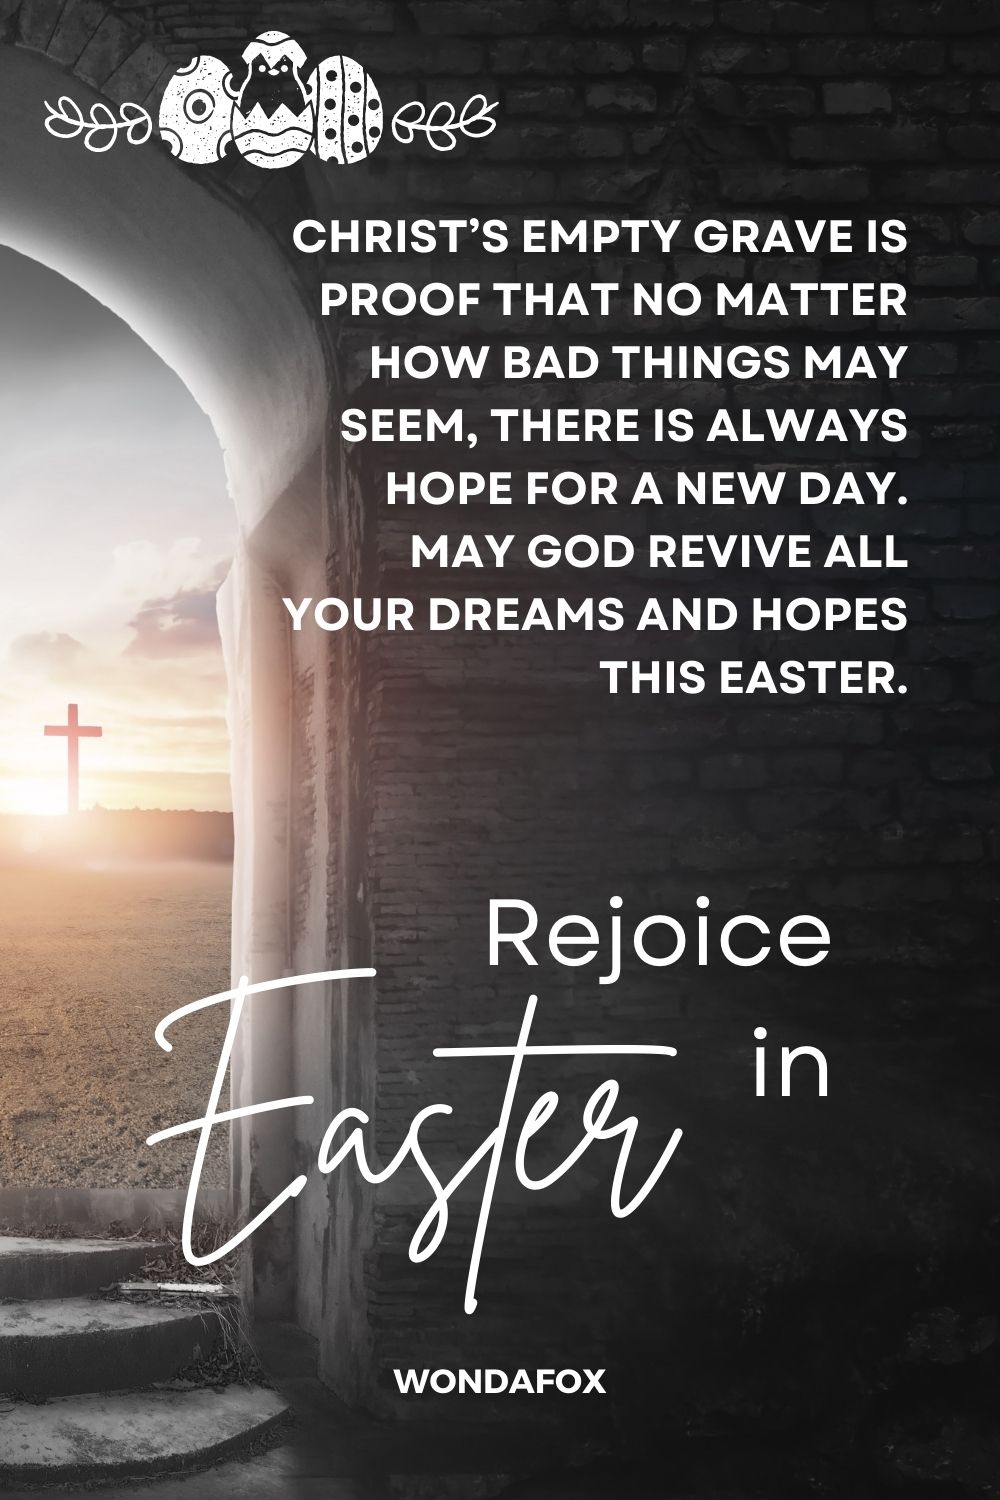 Christ’s empty grave is proof that no matter how bad things may seem, there is always hope for a new day. May God revive all your dreams and hopes this Easter. Rejoice in Easter.